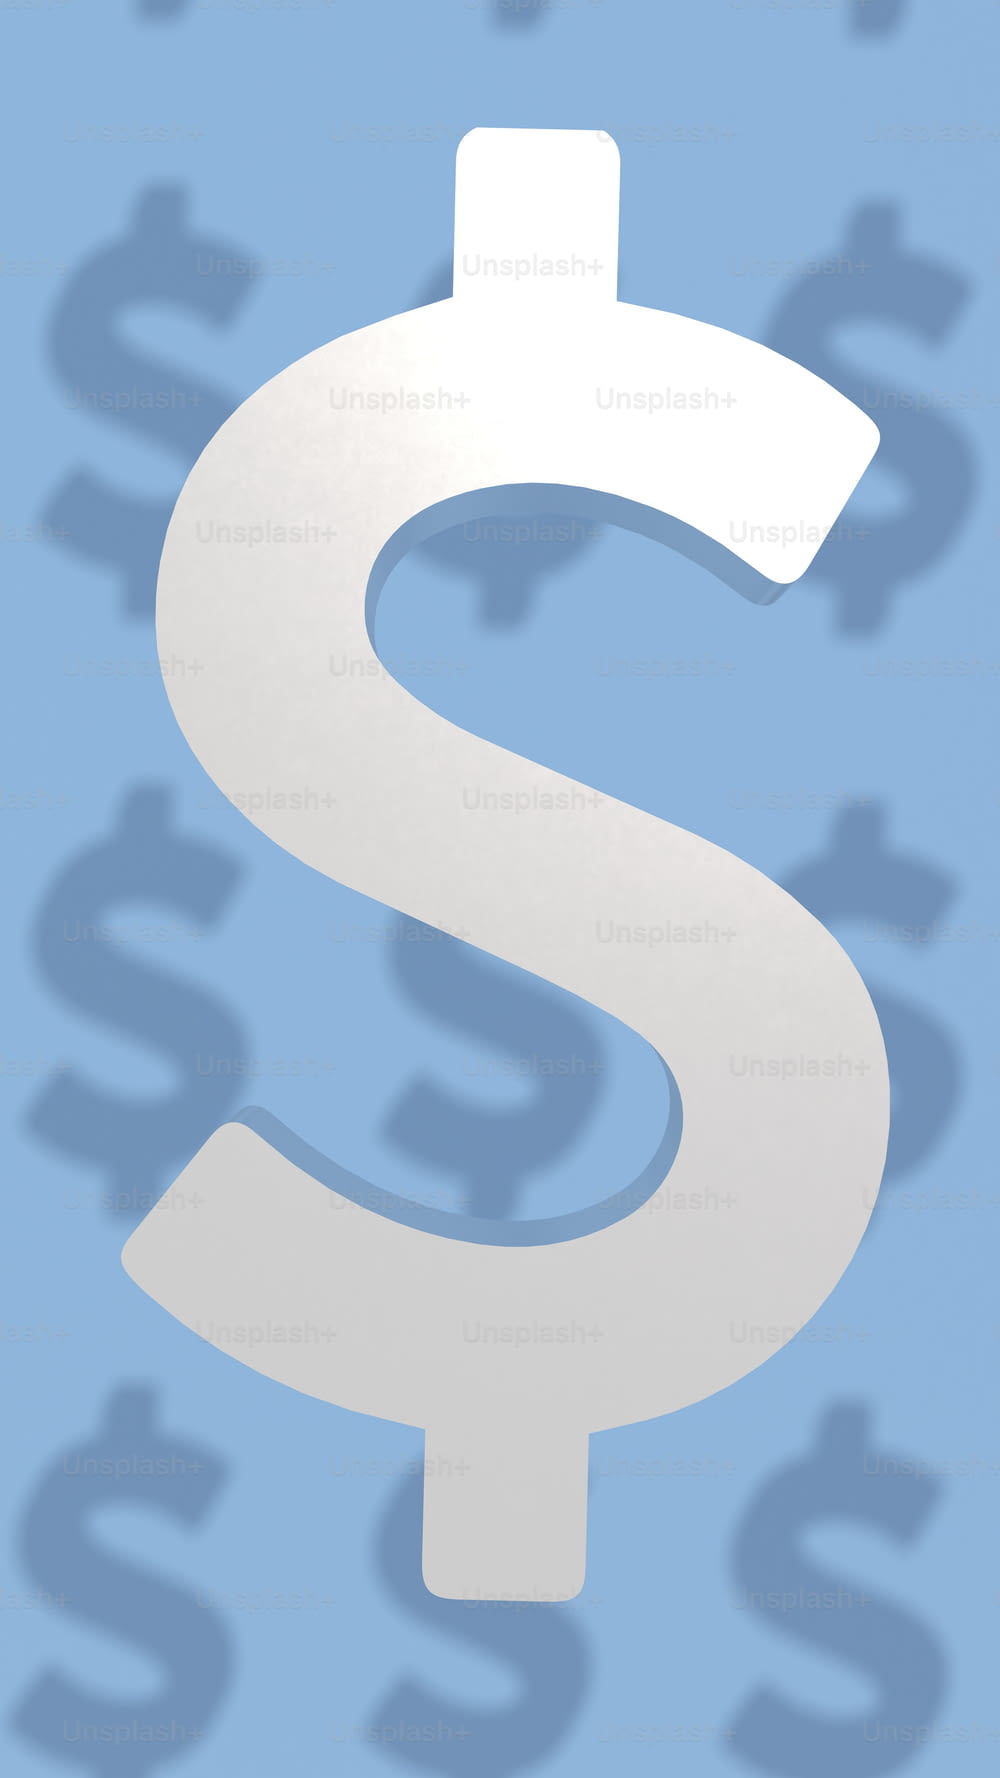 a white dollar sign is shown on a blue background